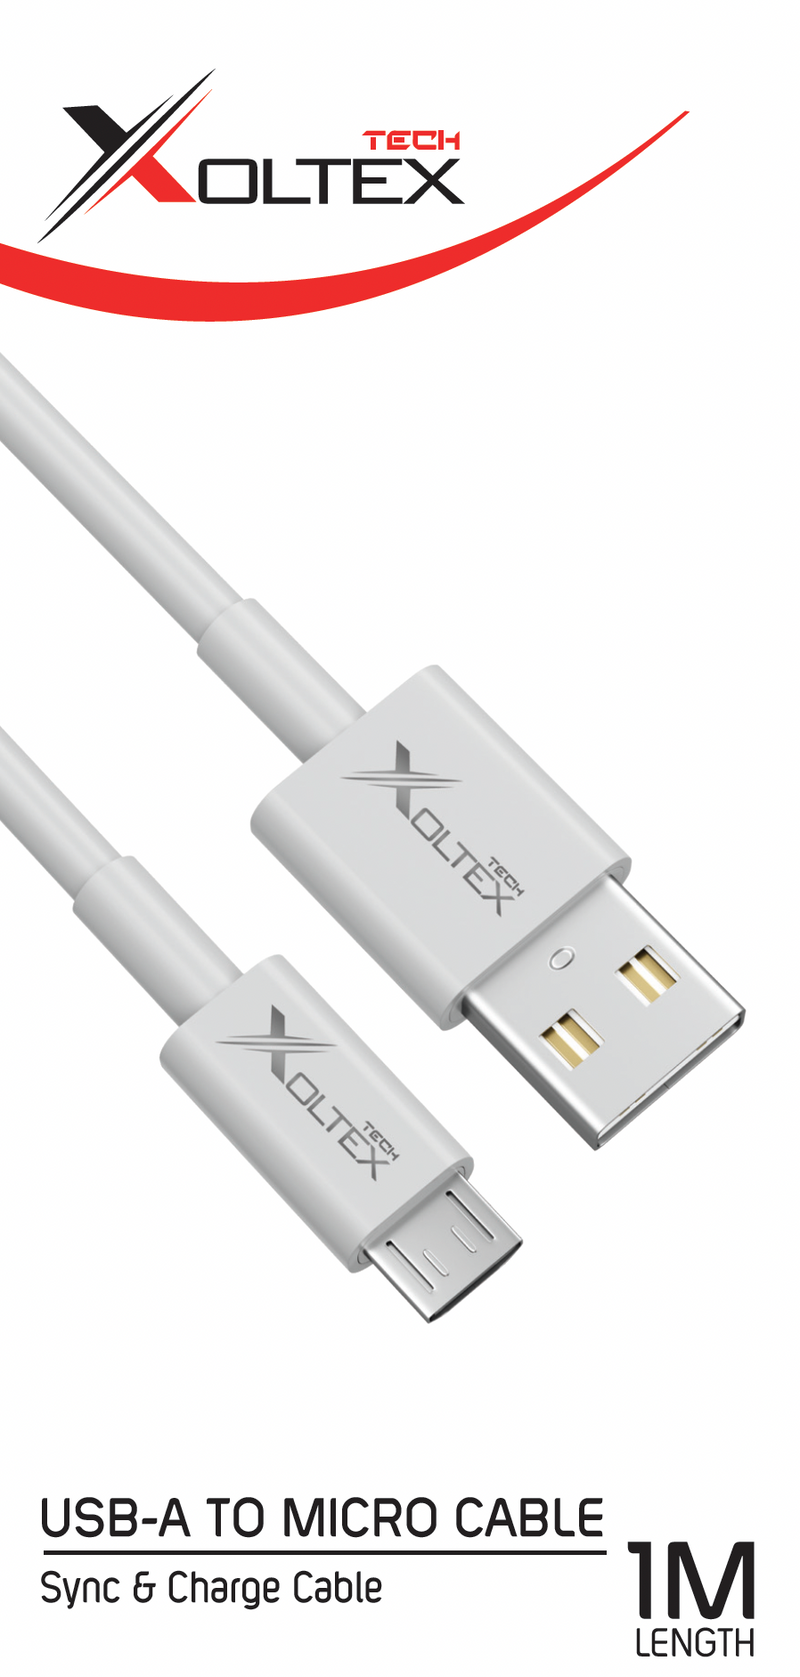 XOLTEX USB-A to Micro Cable RRP $12.50